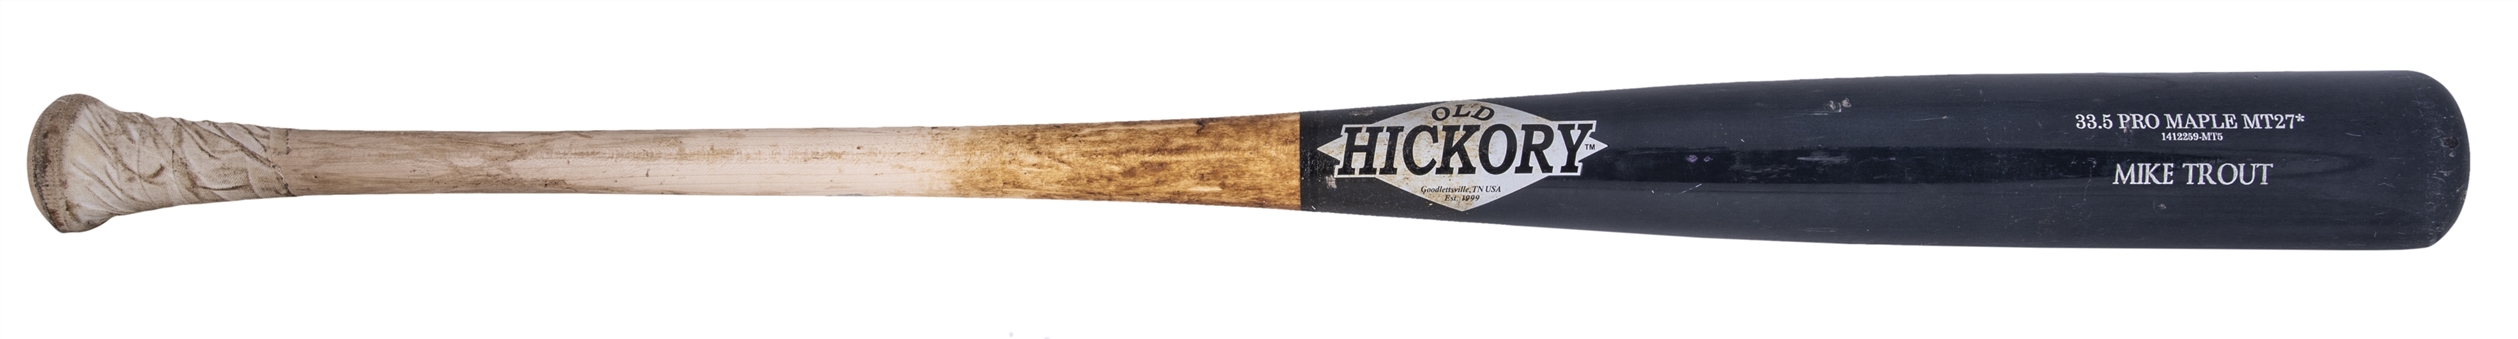 2015 Mike Trout Game Used Old Hickory MT27* Model Bat (PSA/DNA)